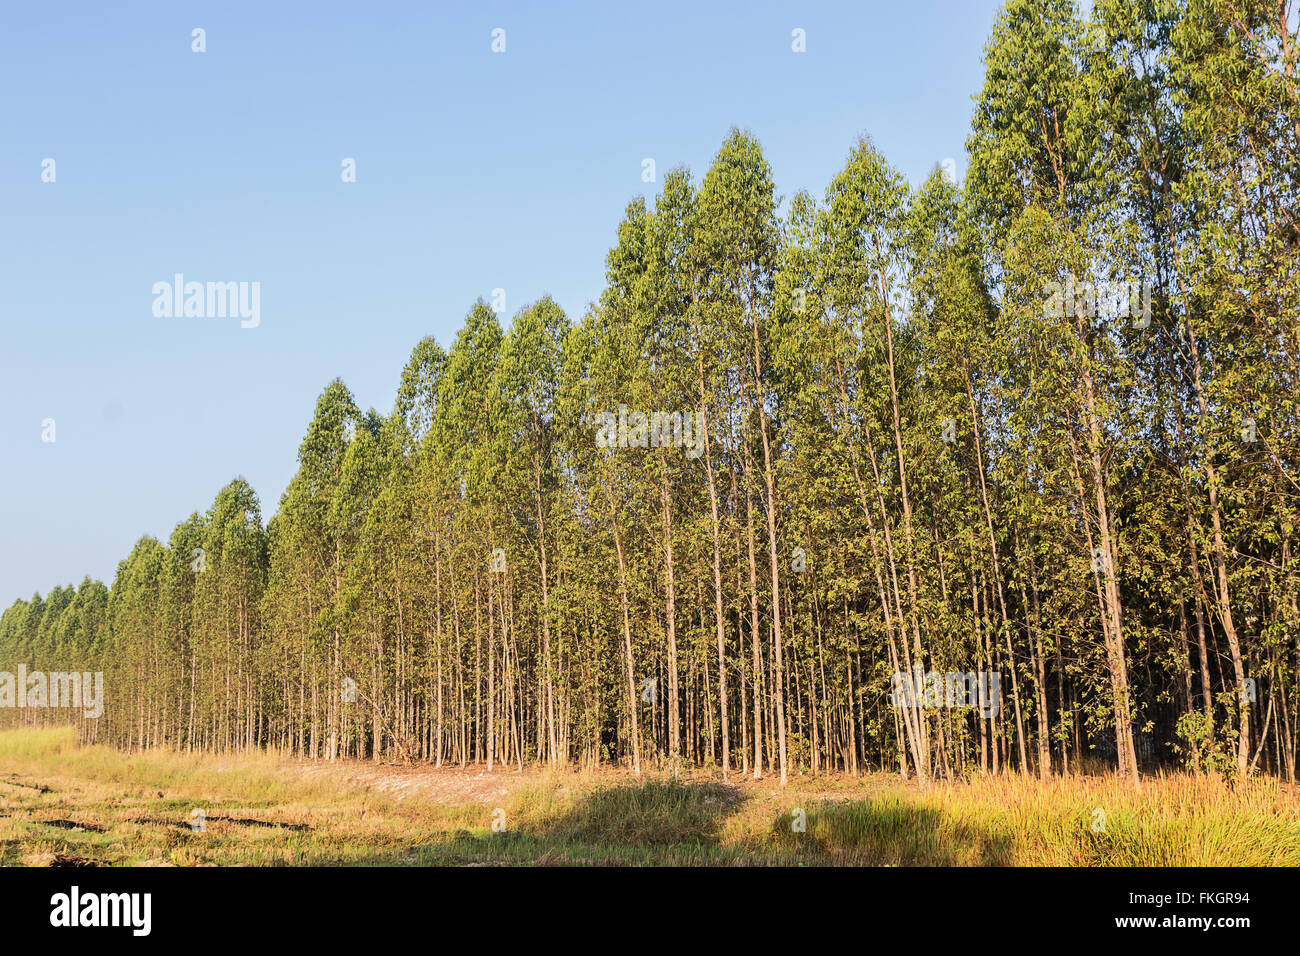 Eucalyptus tree forest in Thailand, plants for paper industry Stock Photo